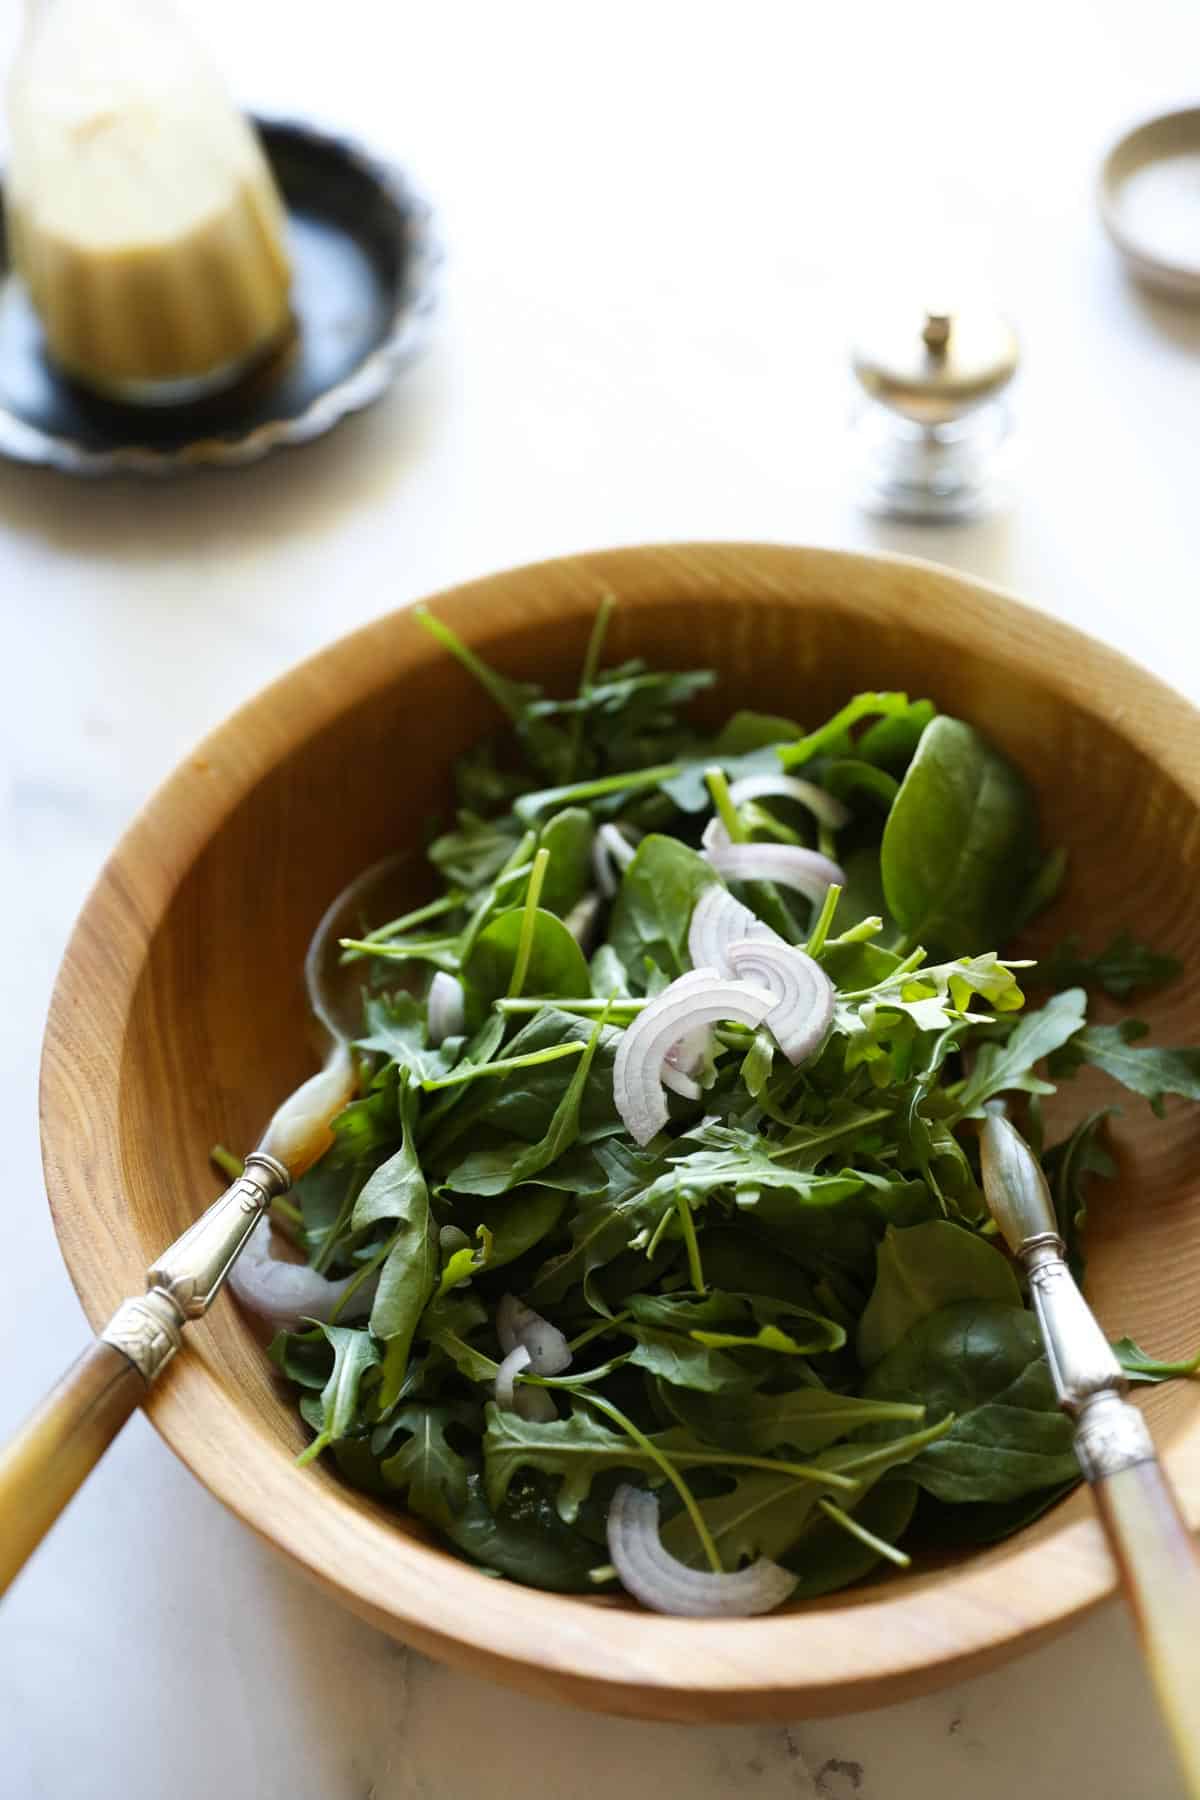 A tossed green sald in a wooden bowl with French vinaigrette